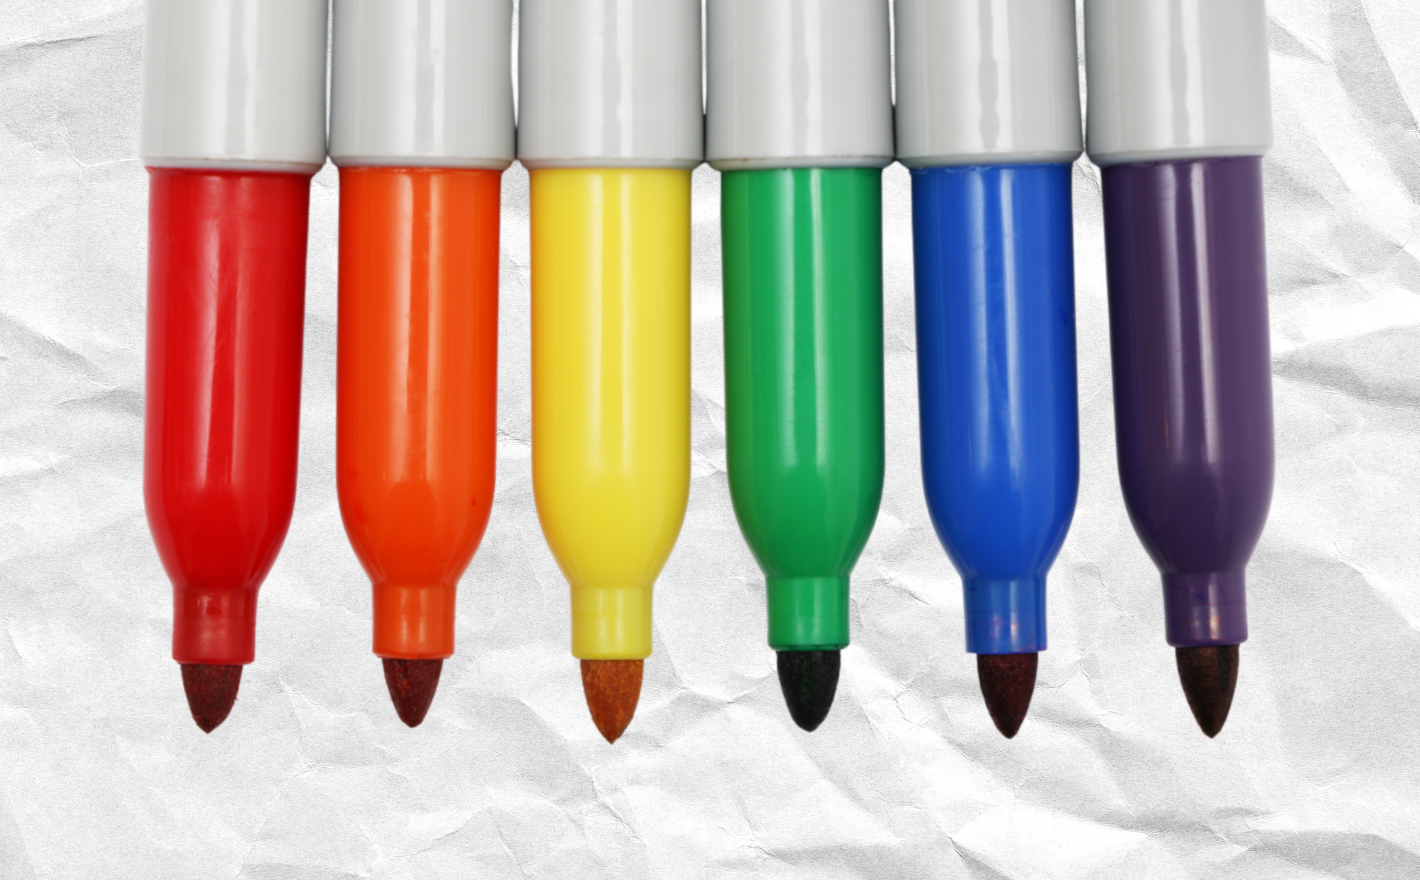 Colored sharpies in rainbow order on a background of a crumpled piece of paper